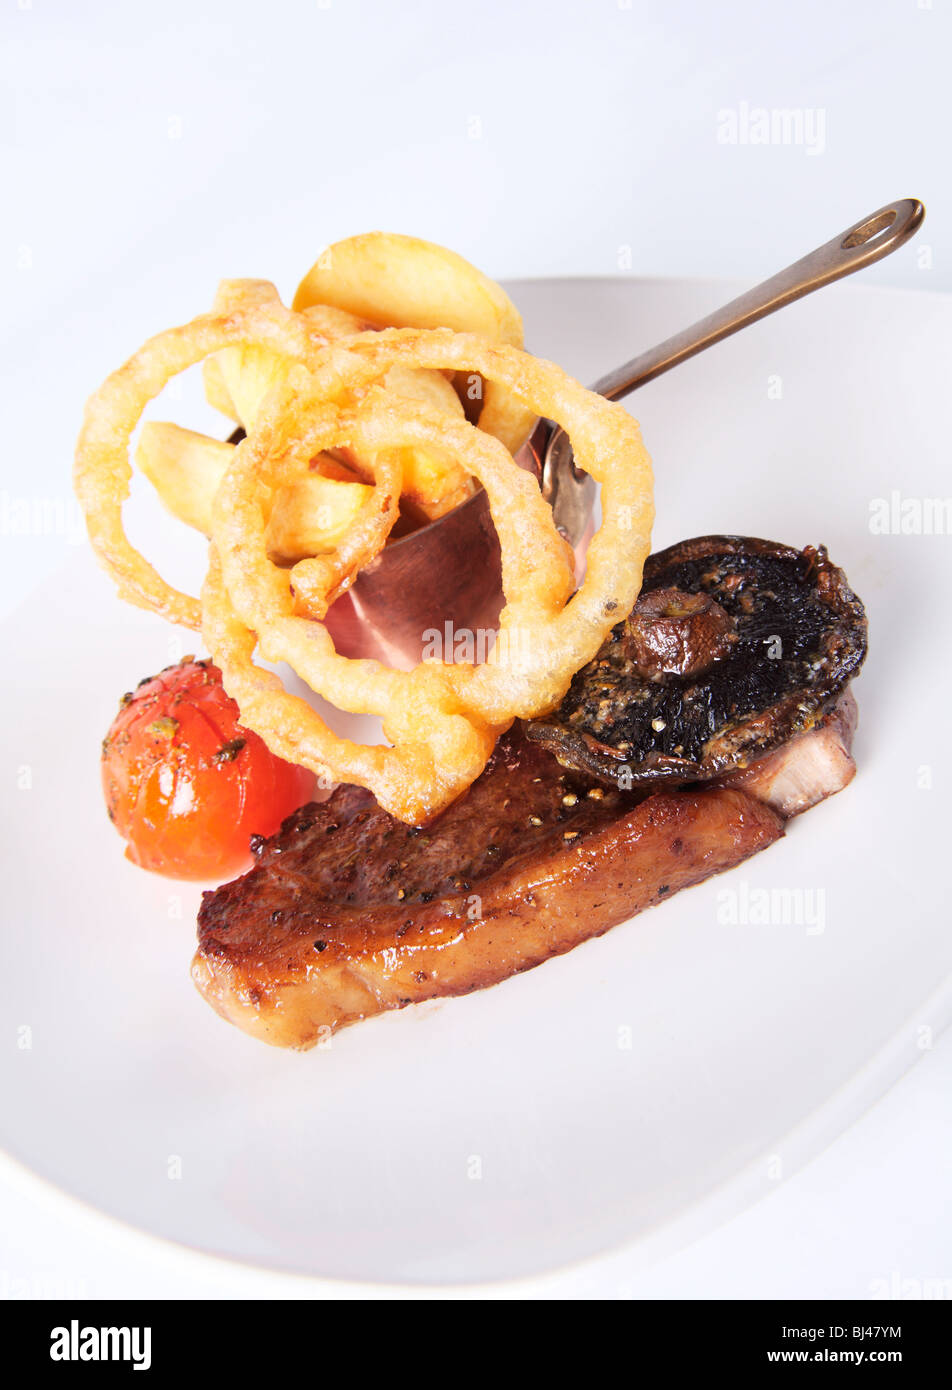 Fried Sirloin Steak with Chips and Tempura Batter Onion Rings Stock Photo